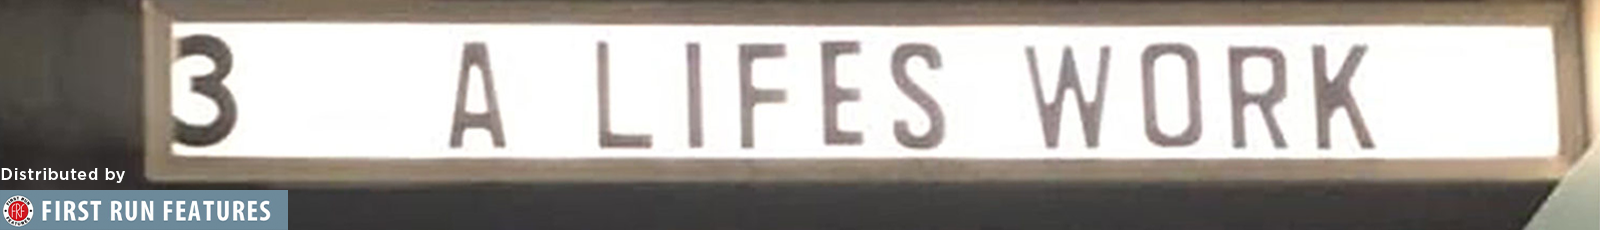 Marquee showing A Life's Work